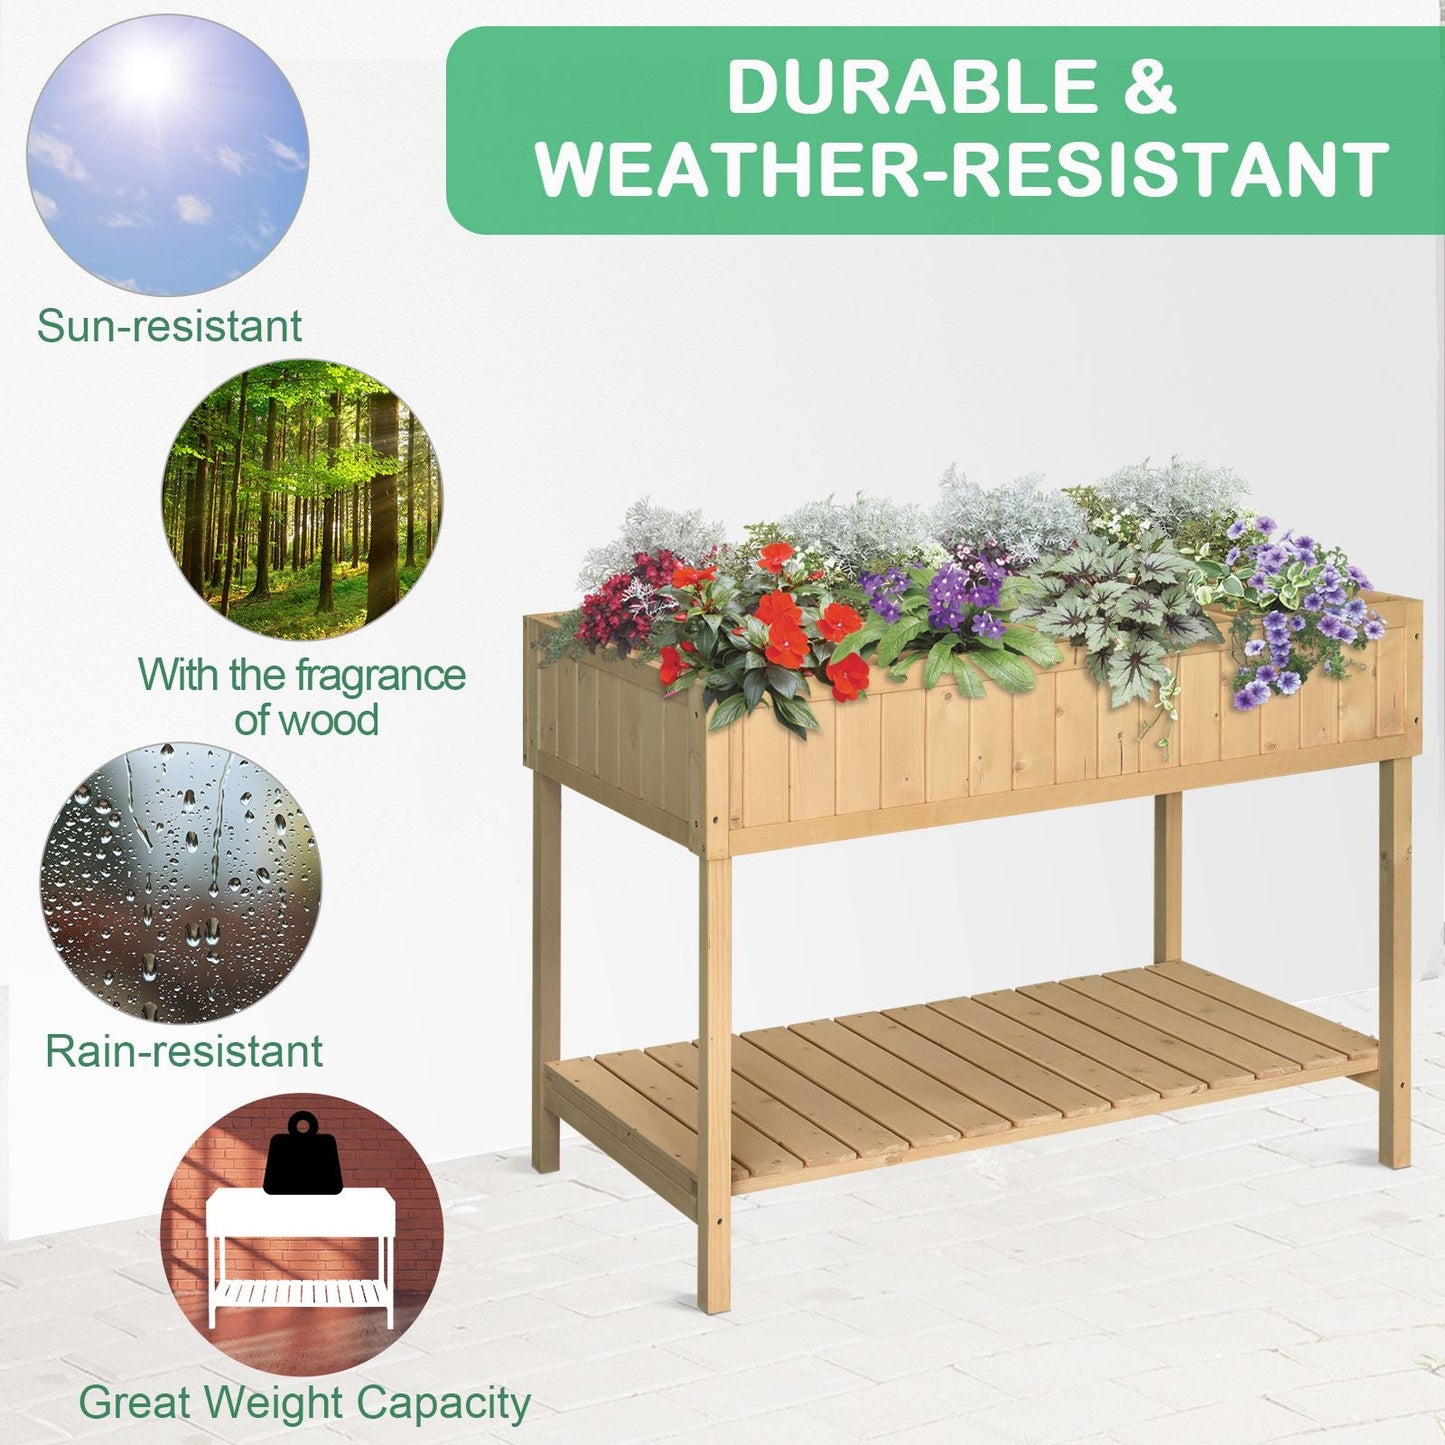 Outdoor and Garden-Raised Wooden Garden Bed Grid Planter Stand with 8 Slots Perfect for Limited Garden Space to Grow Herbs Veggies and Flowers - Outdoor Style Company